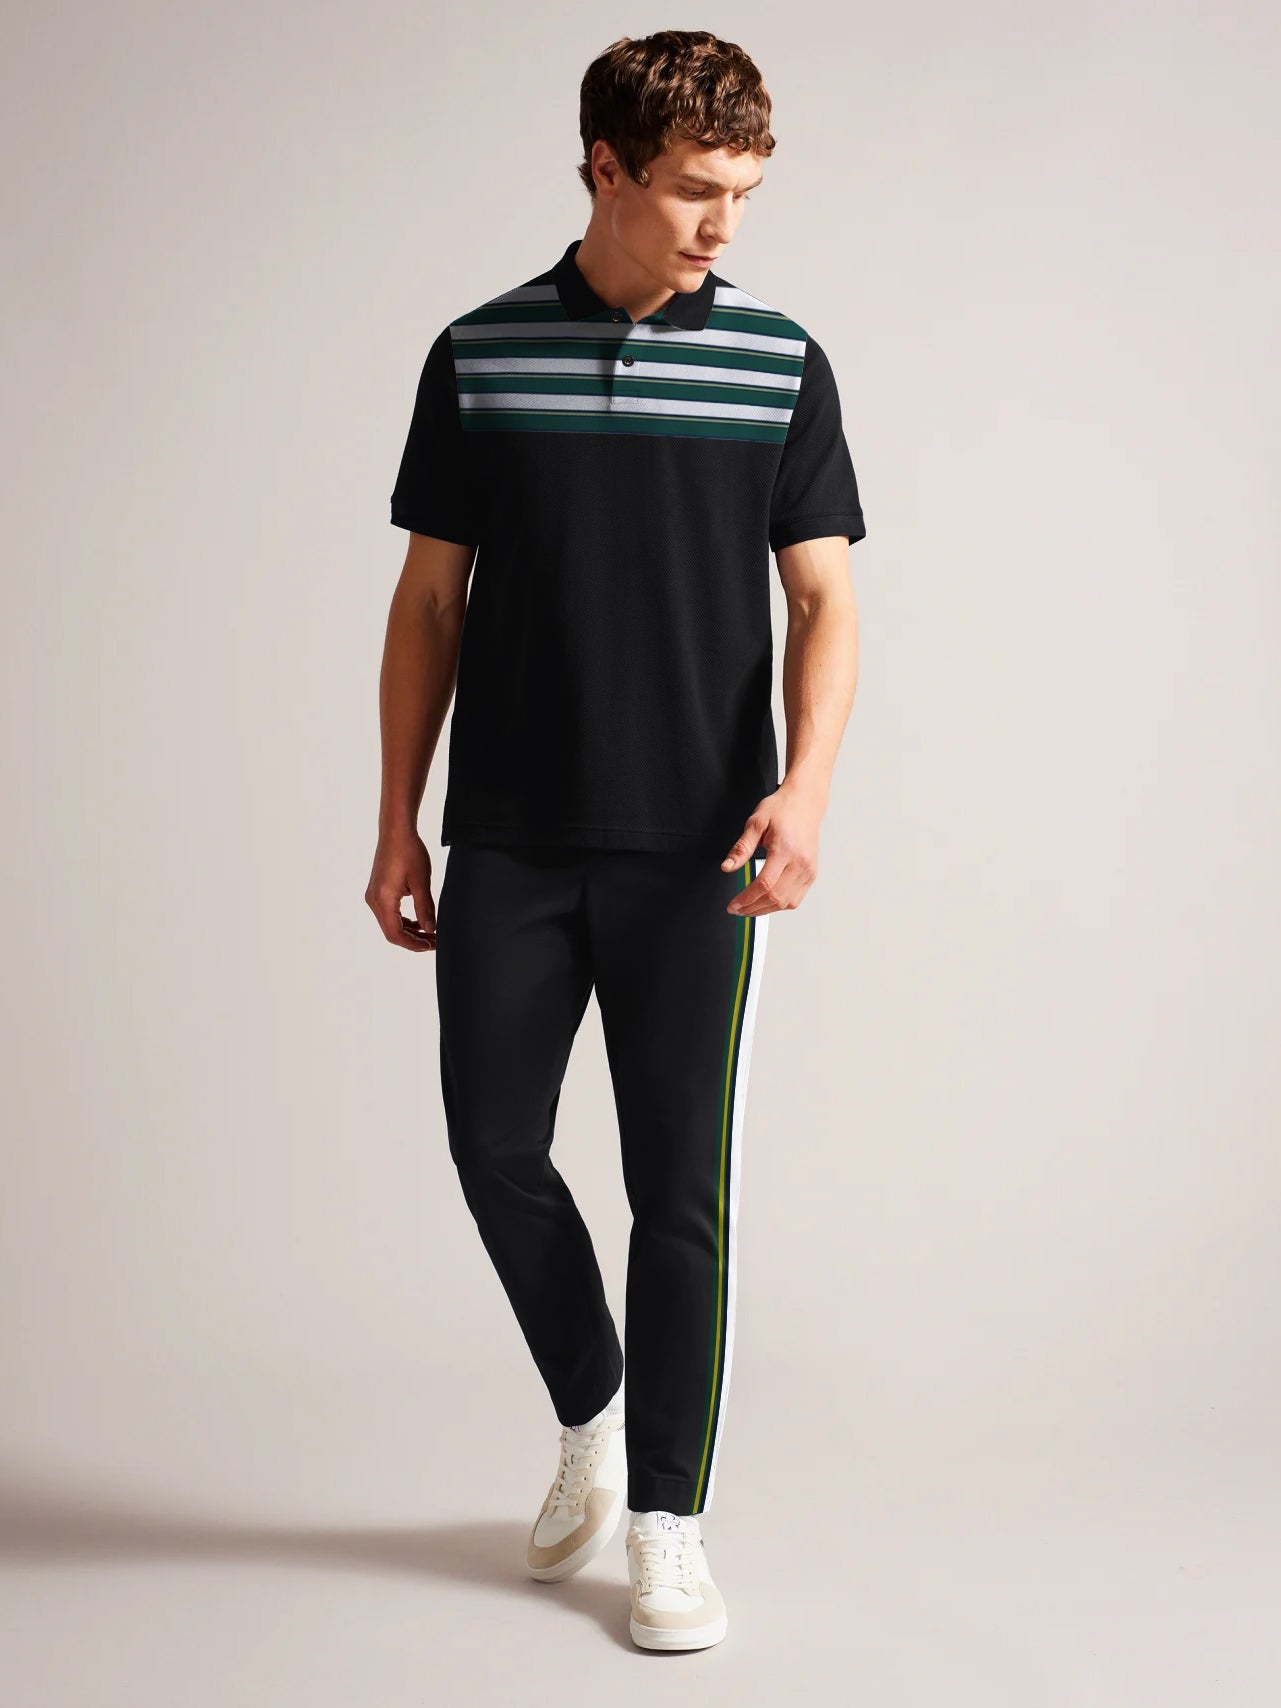 Louis Vicaci Stretchy Single Jersey Tracksuit For Men-Black with Stripe-BR604